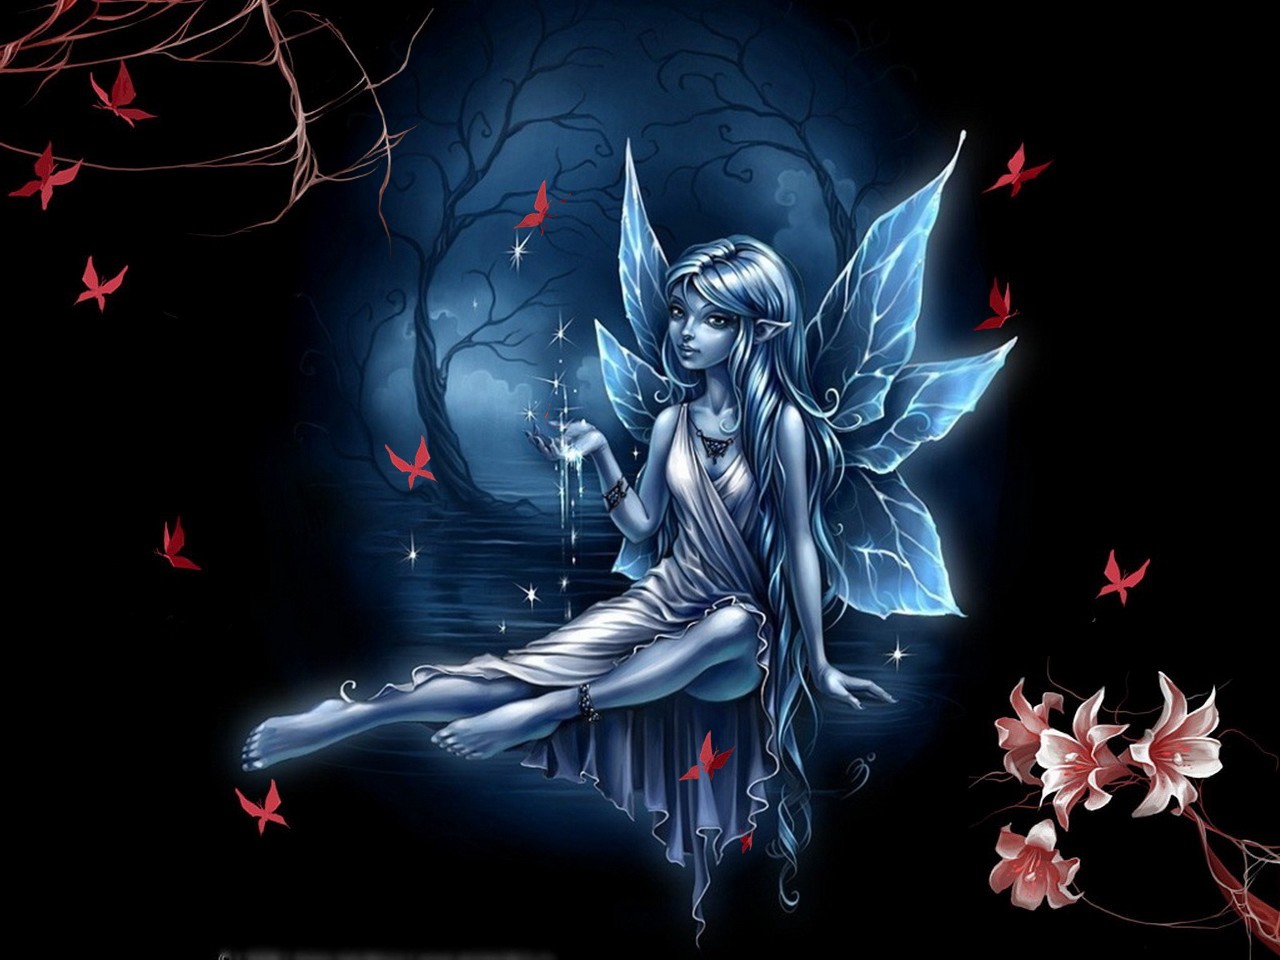 Fairy HD Wallpaper Check Out The Cool